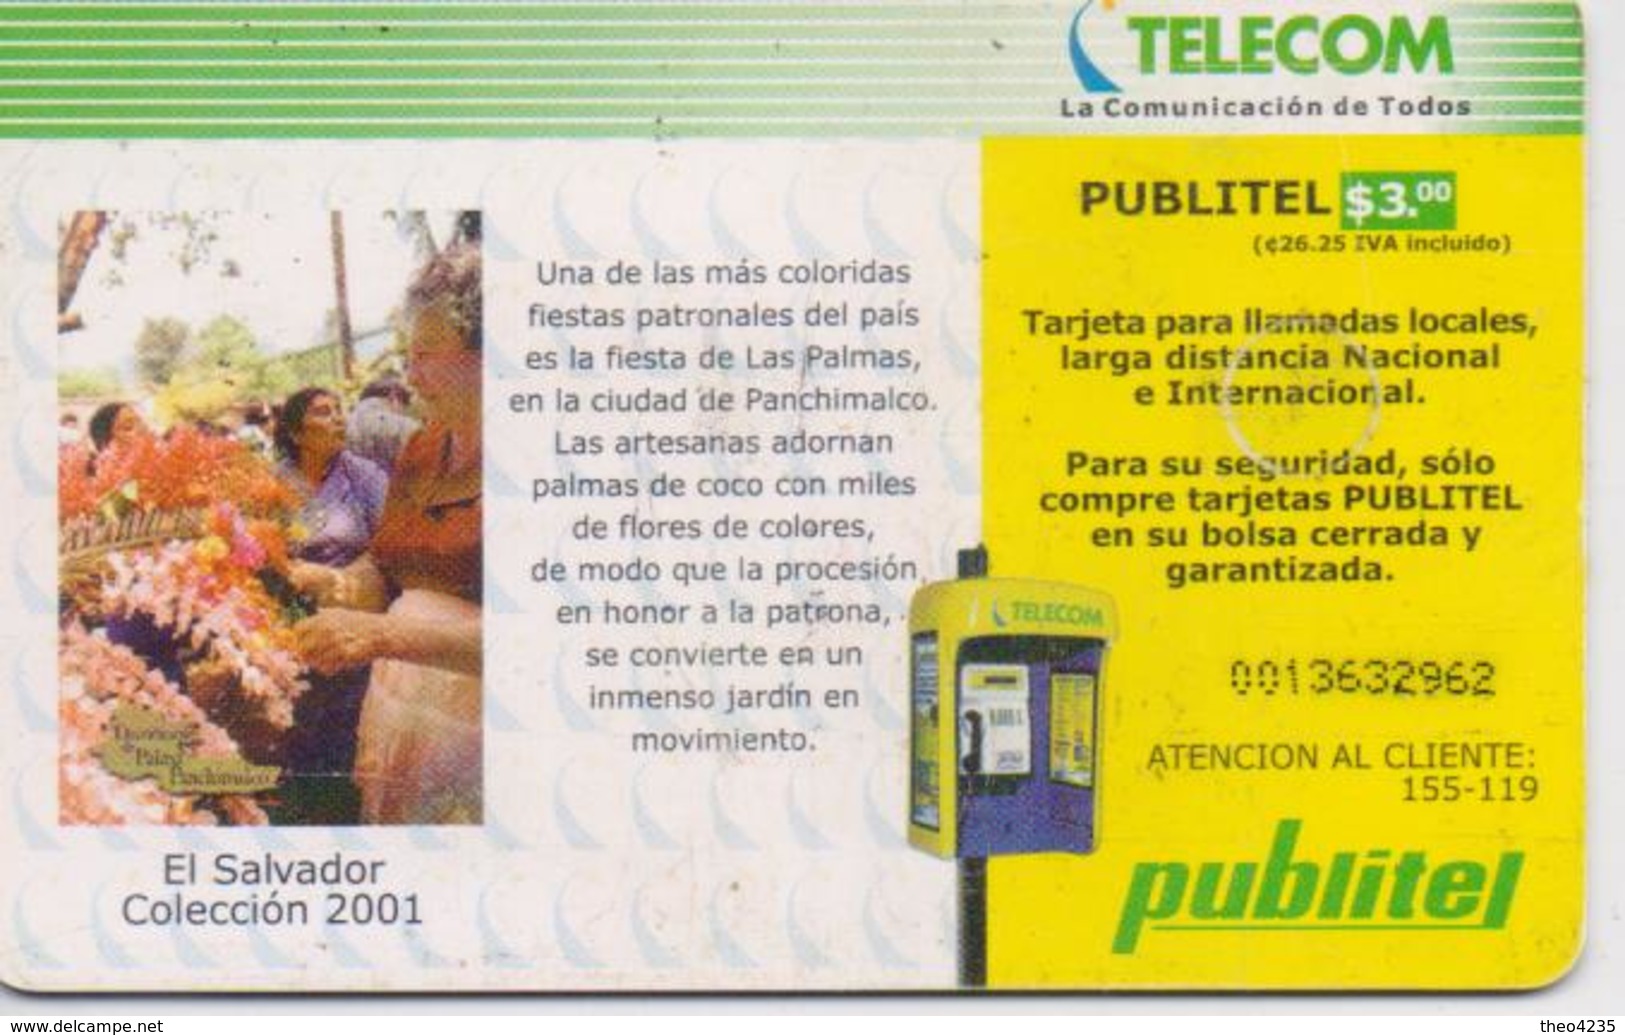 EL SALVADOR PHONECARD(CHIP) DECORATING THE PALM LEAVES 3$- 2001-USED(bx1) - Salvador